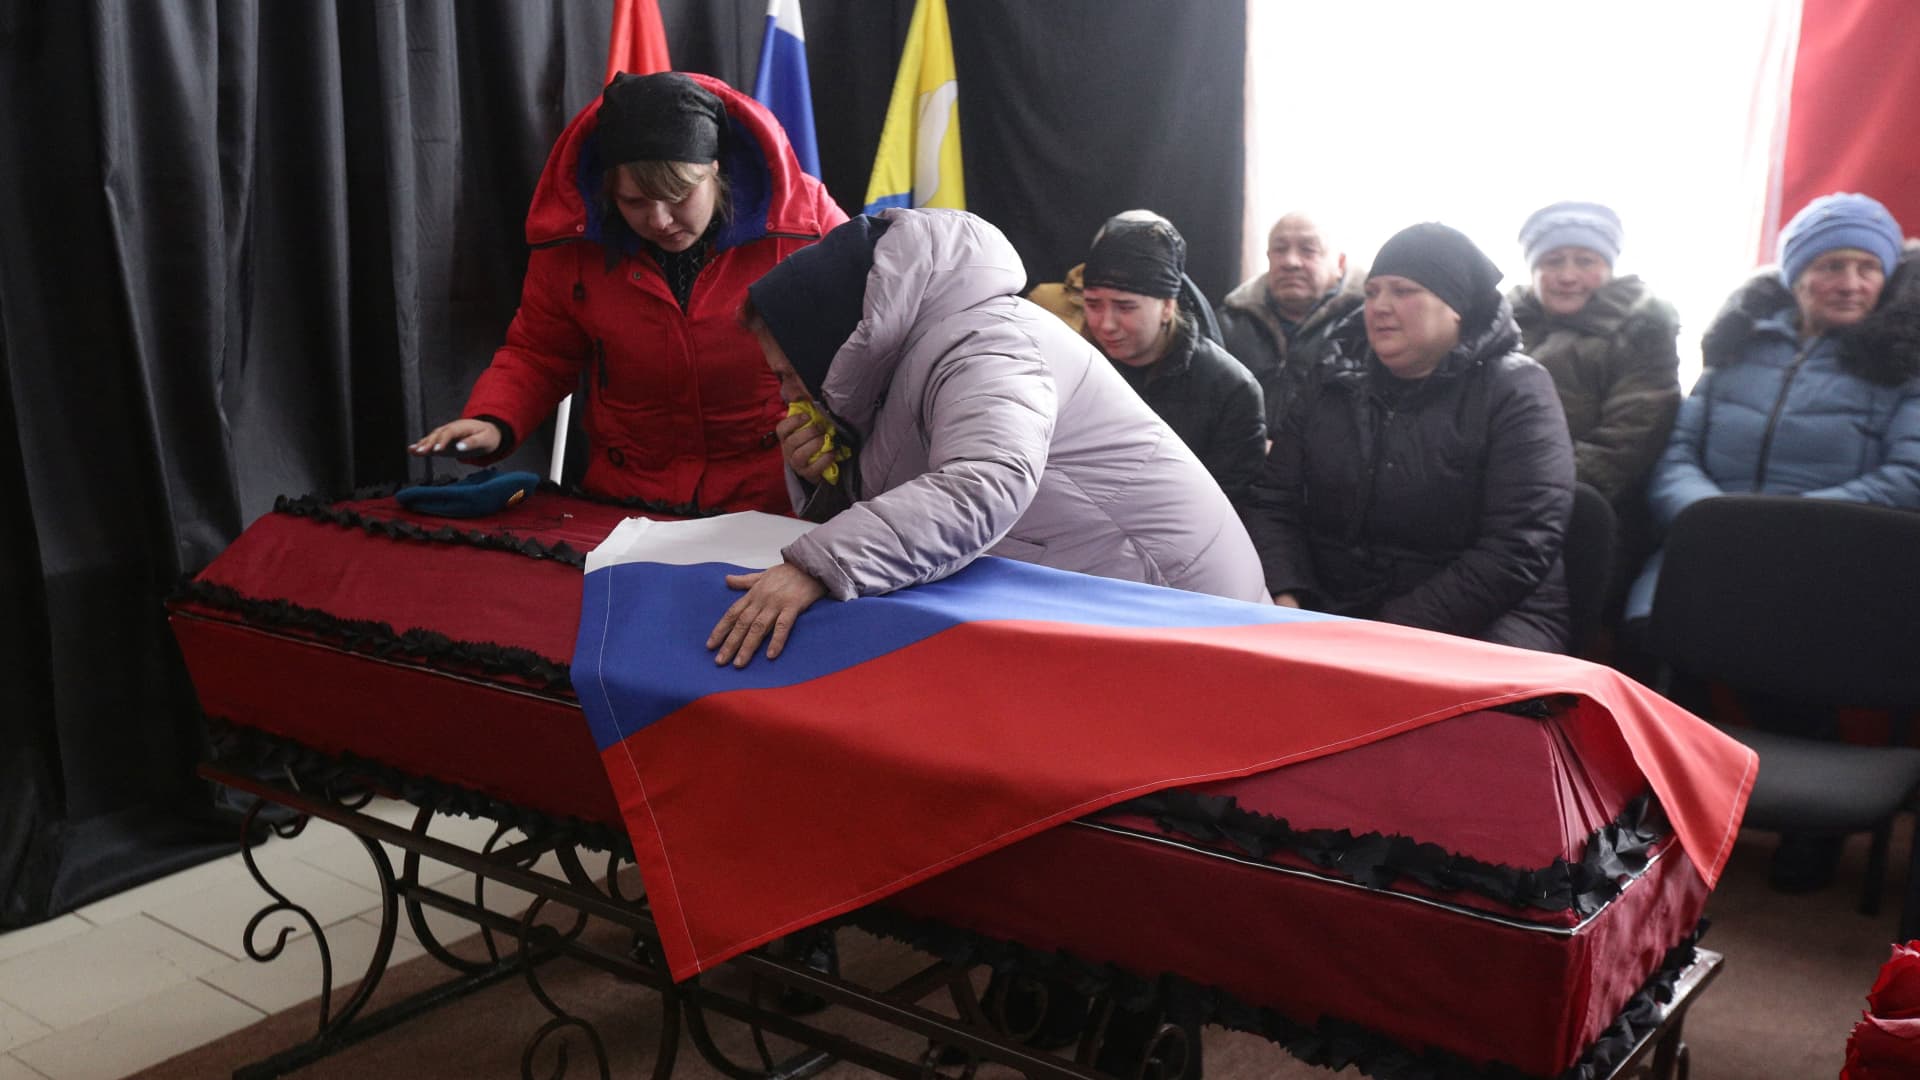 People attend a farewell ceremony for Sergei Sokolov, the 21 year-old serviceman who was killed during Russian military action in Ukraine, in the settlement of Zubkovo in Novosibirsk region on March 24, 2022.